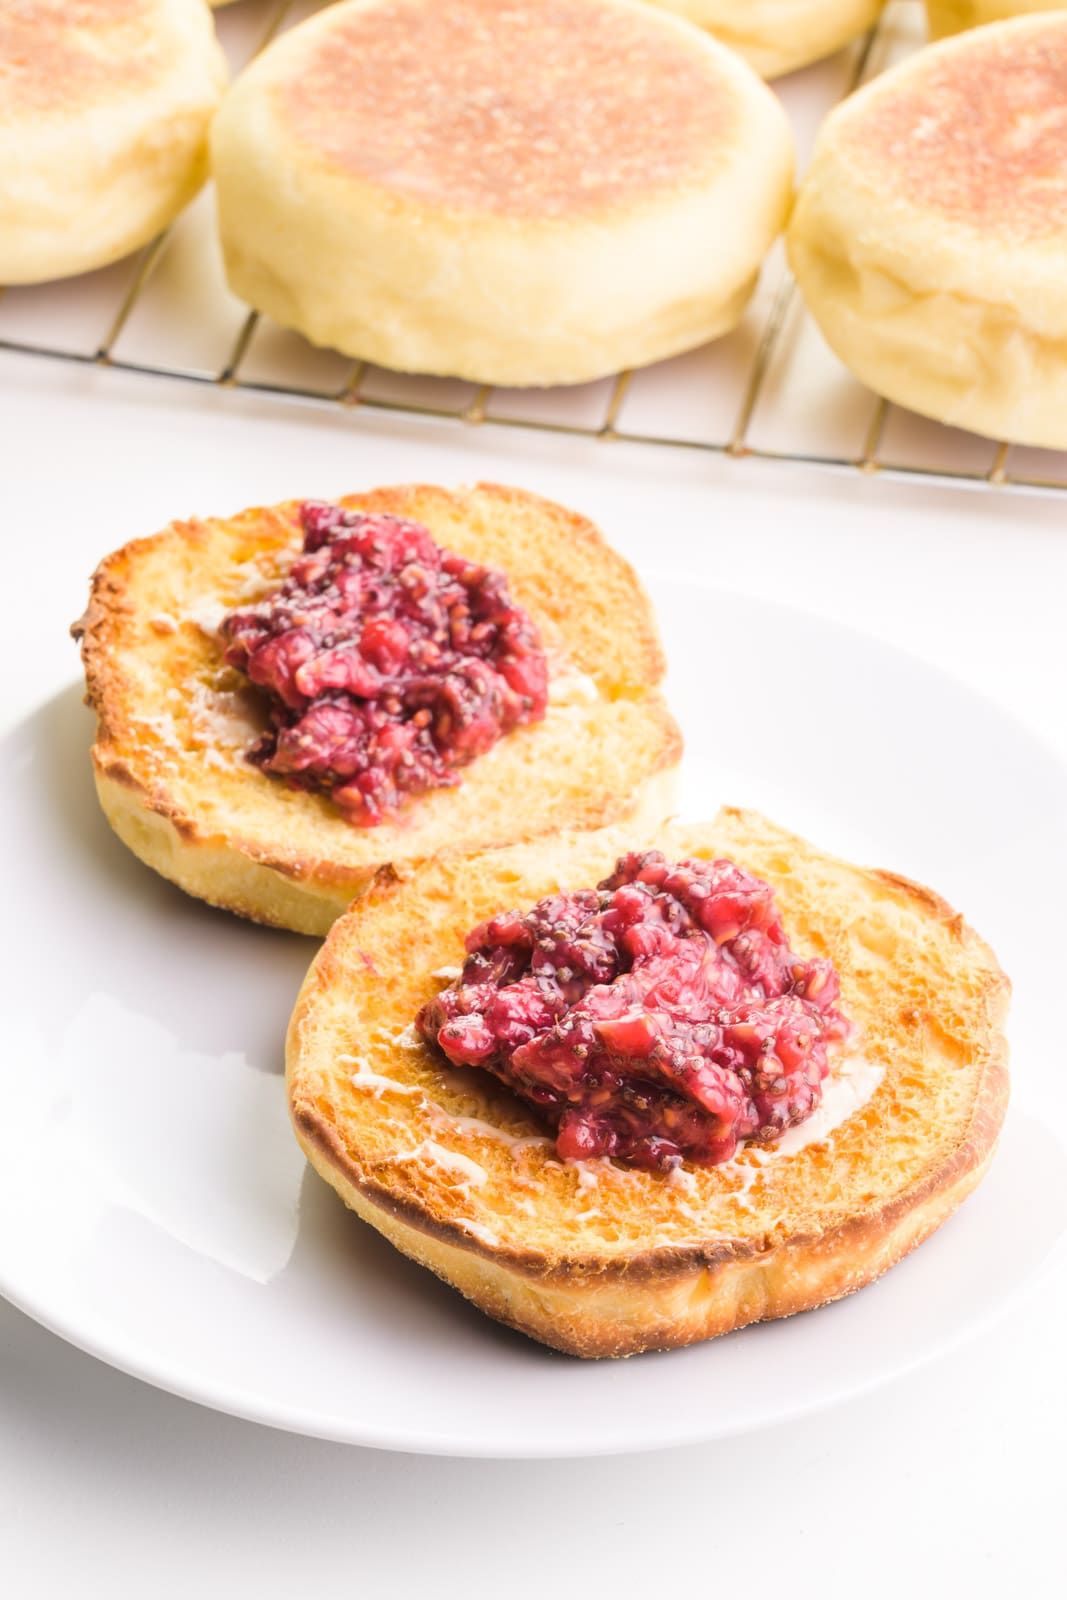 Toasted English muffins have jam on top. There's a wire rack with more in the background.